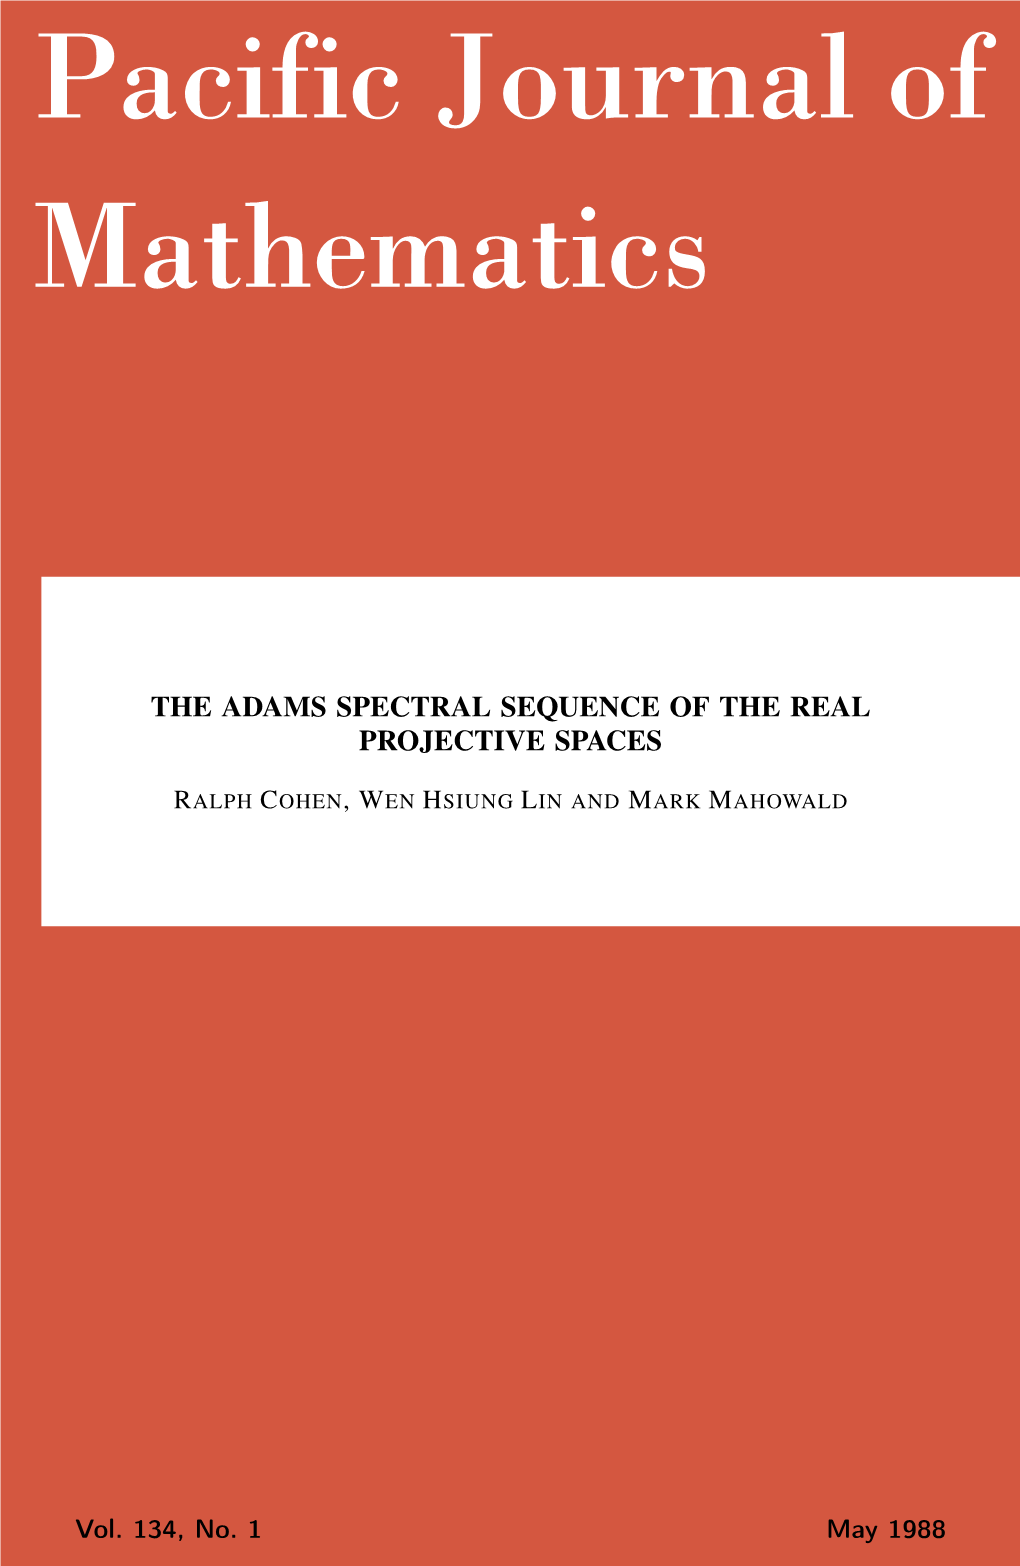 The Adams Spectral Sequence of the Real Projective Spaces